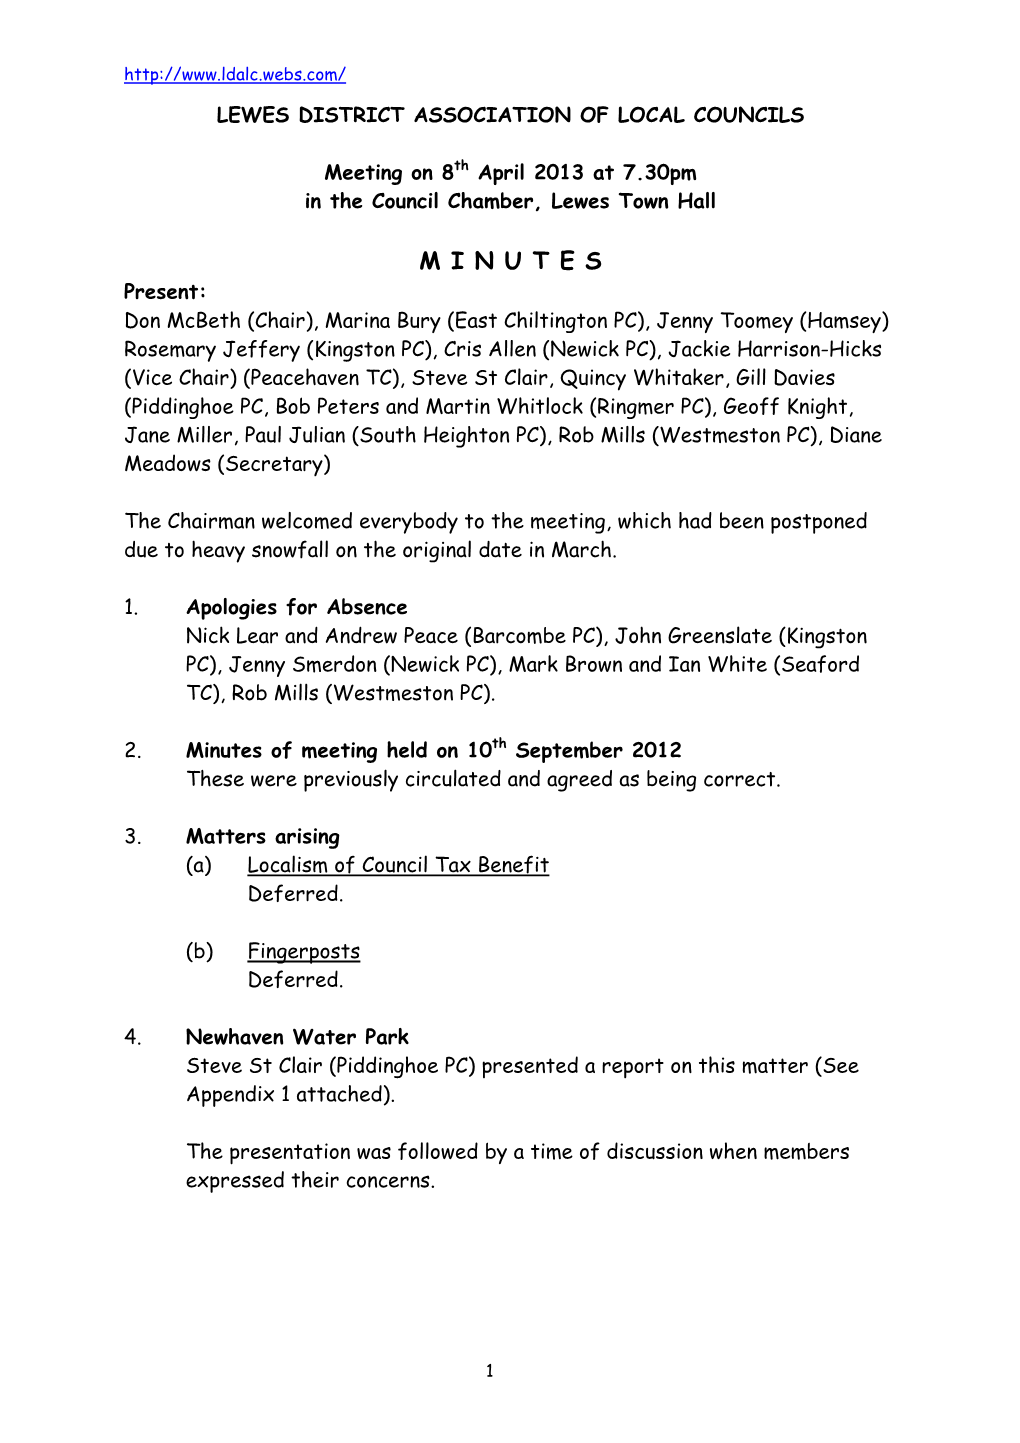 Minutes of Meeting Held on 10Th September 2012 These Were Previously Circulated and Agreed As Being Correct